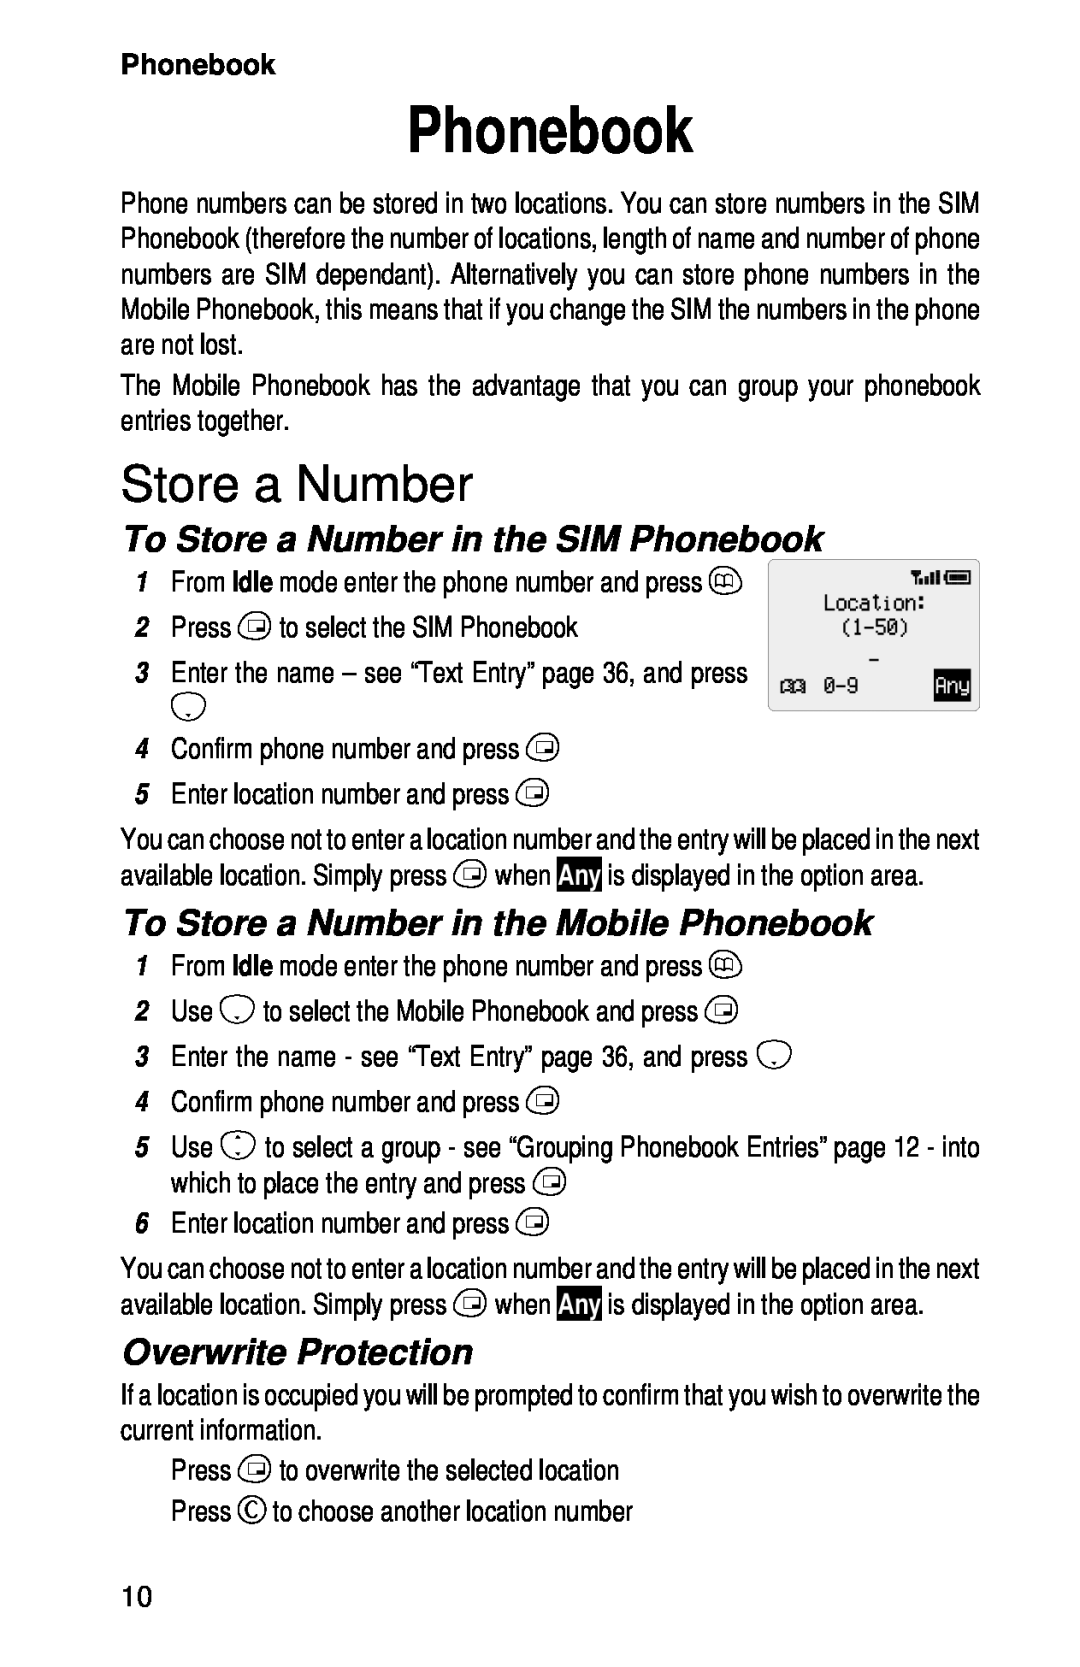 Panasonic EB-GD52 To Store a Number in the SIM Phonebook, To Store a Number in the Mobile Phonebook 